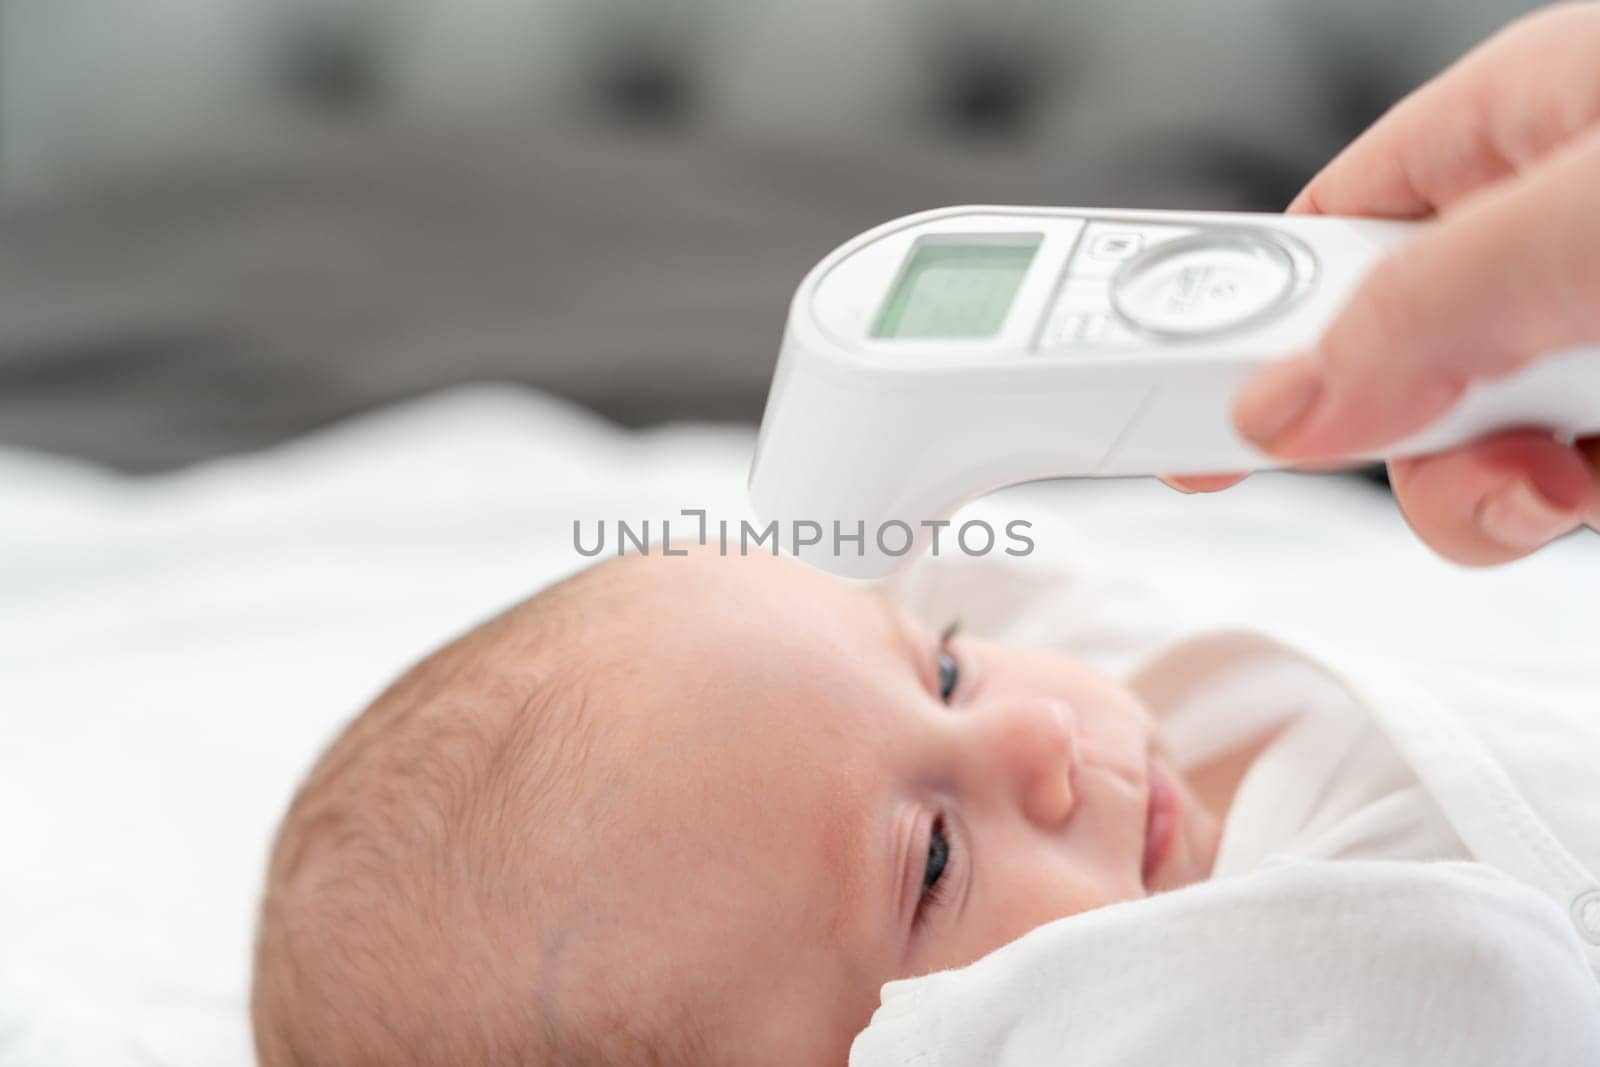 A dedicated mother checks the temperature of her infant baby, using a reliable digital thermometer